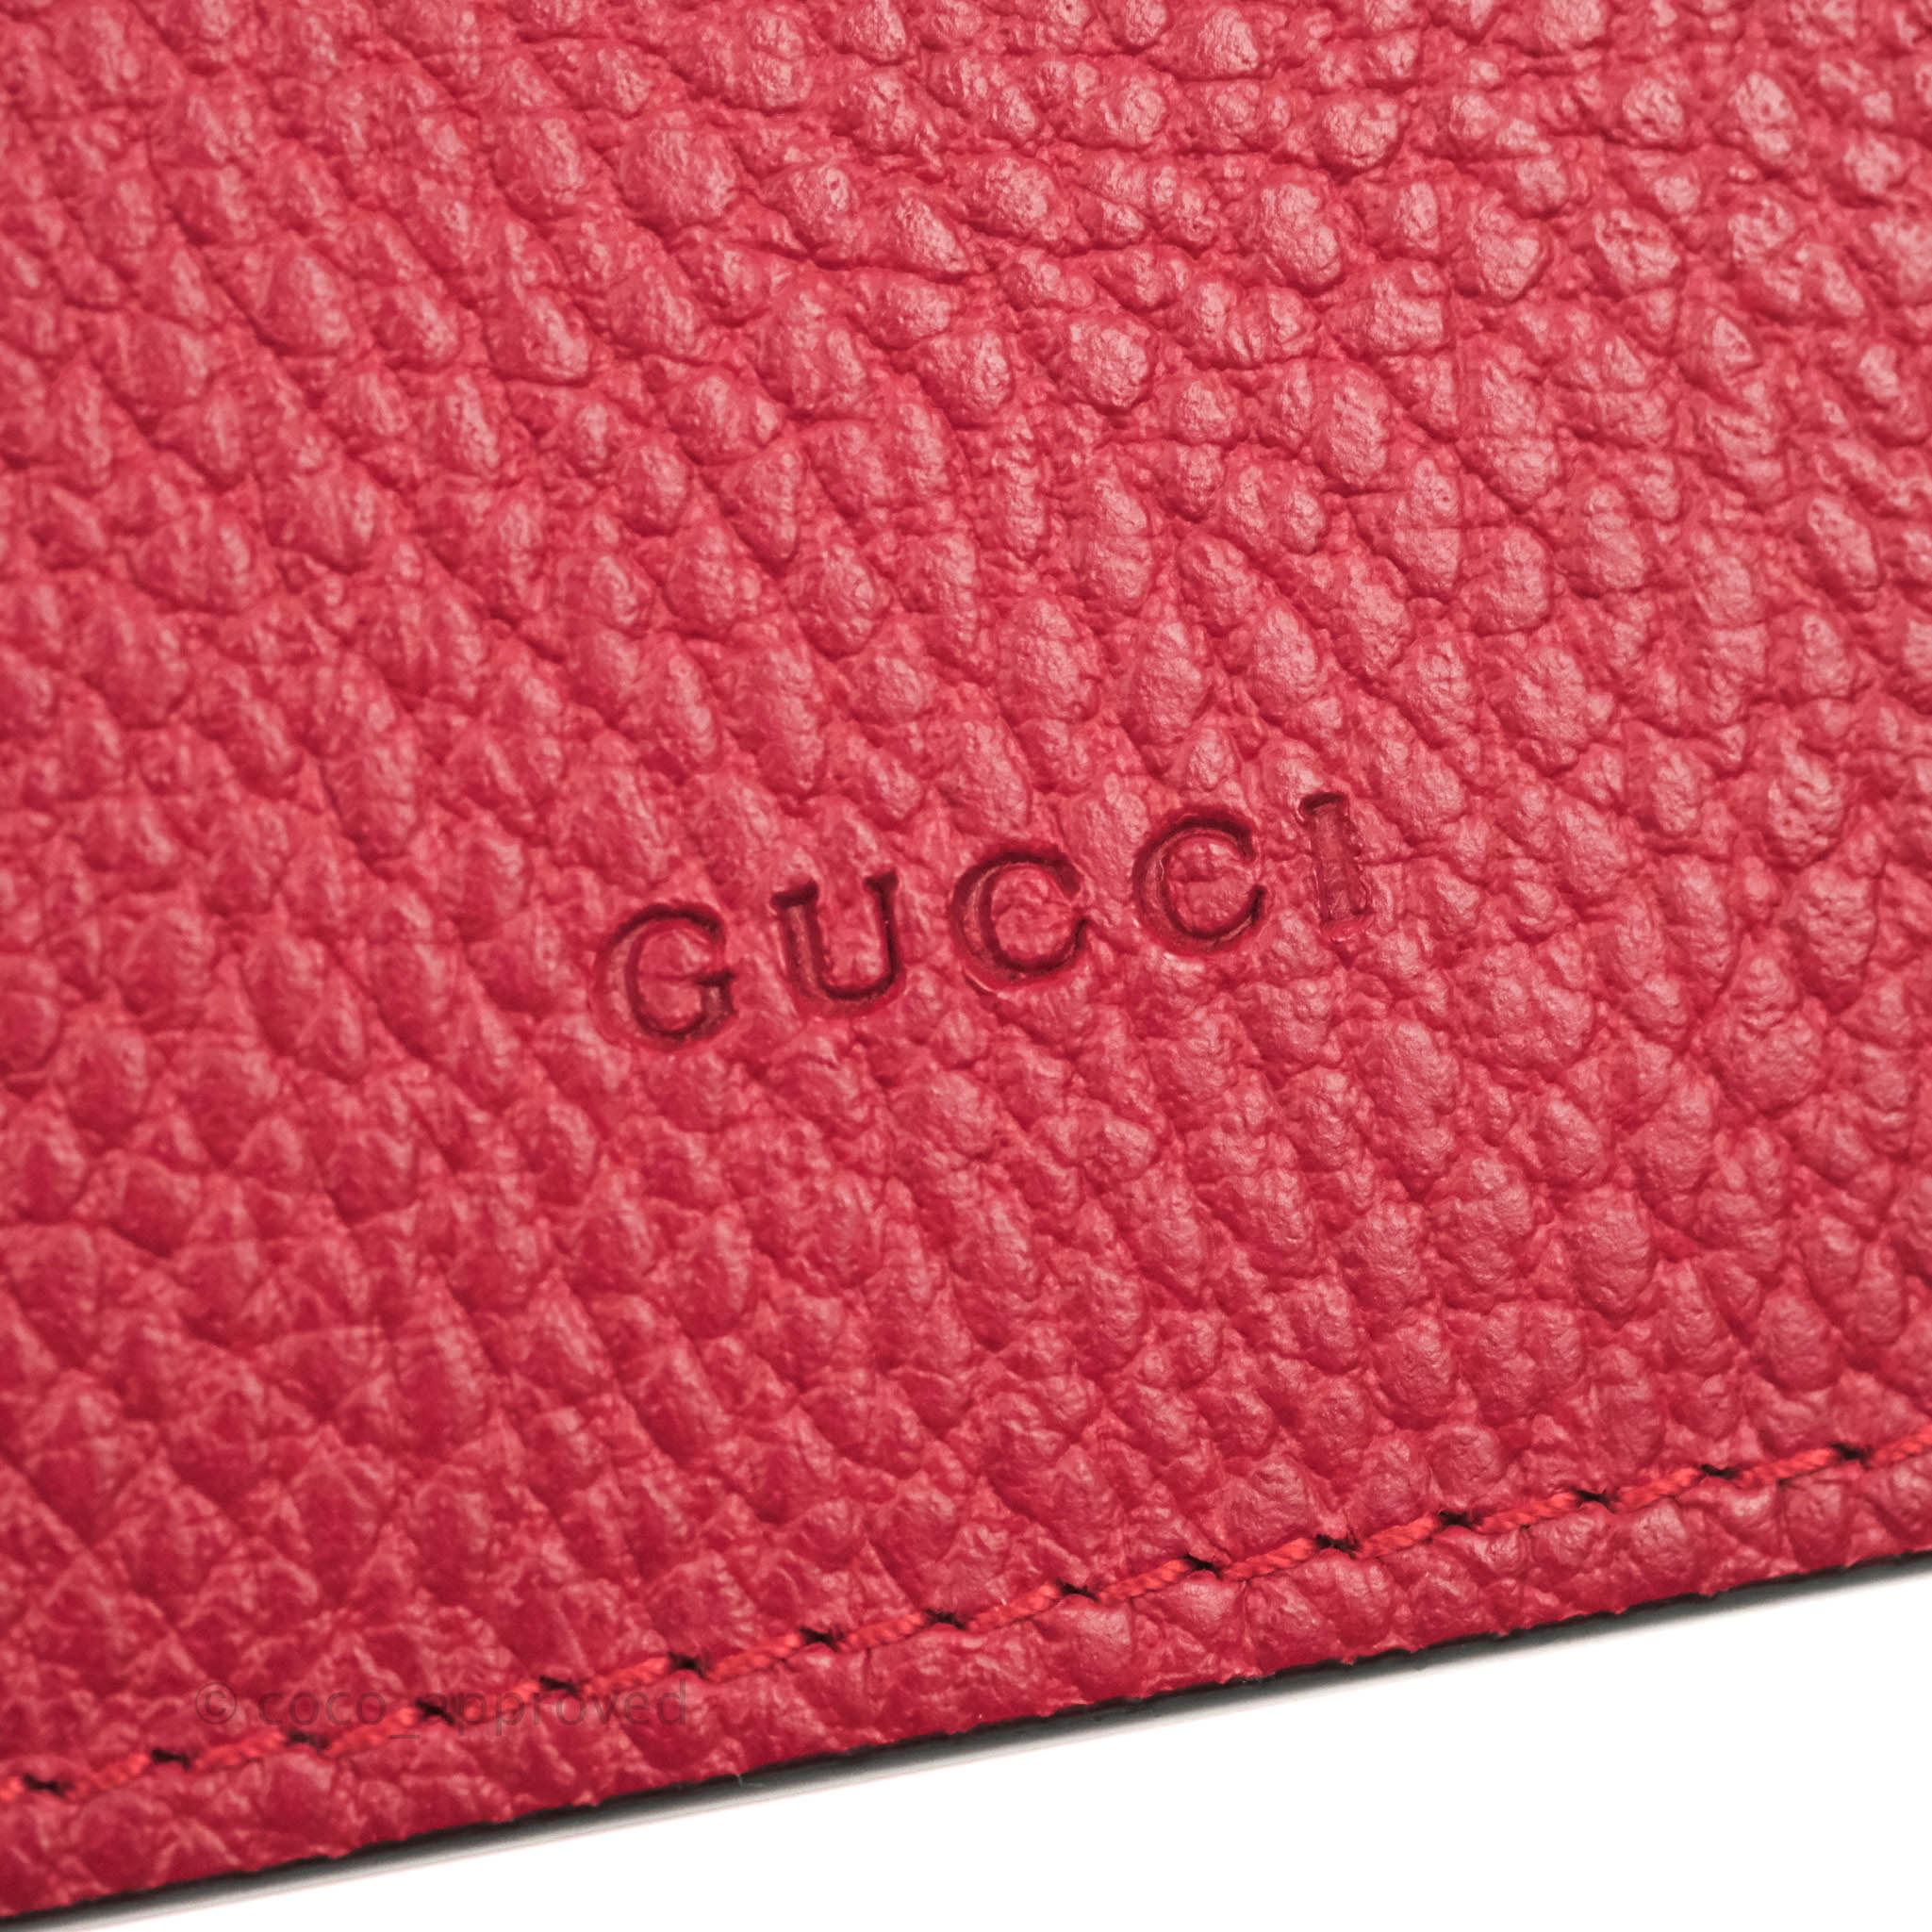 Gucci Medium Dionysus Red Leather Bamboo Top Handle Bag – Coco